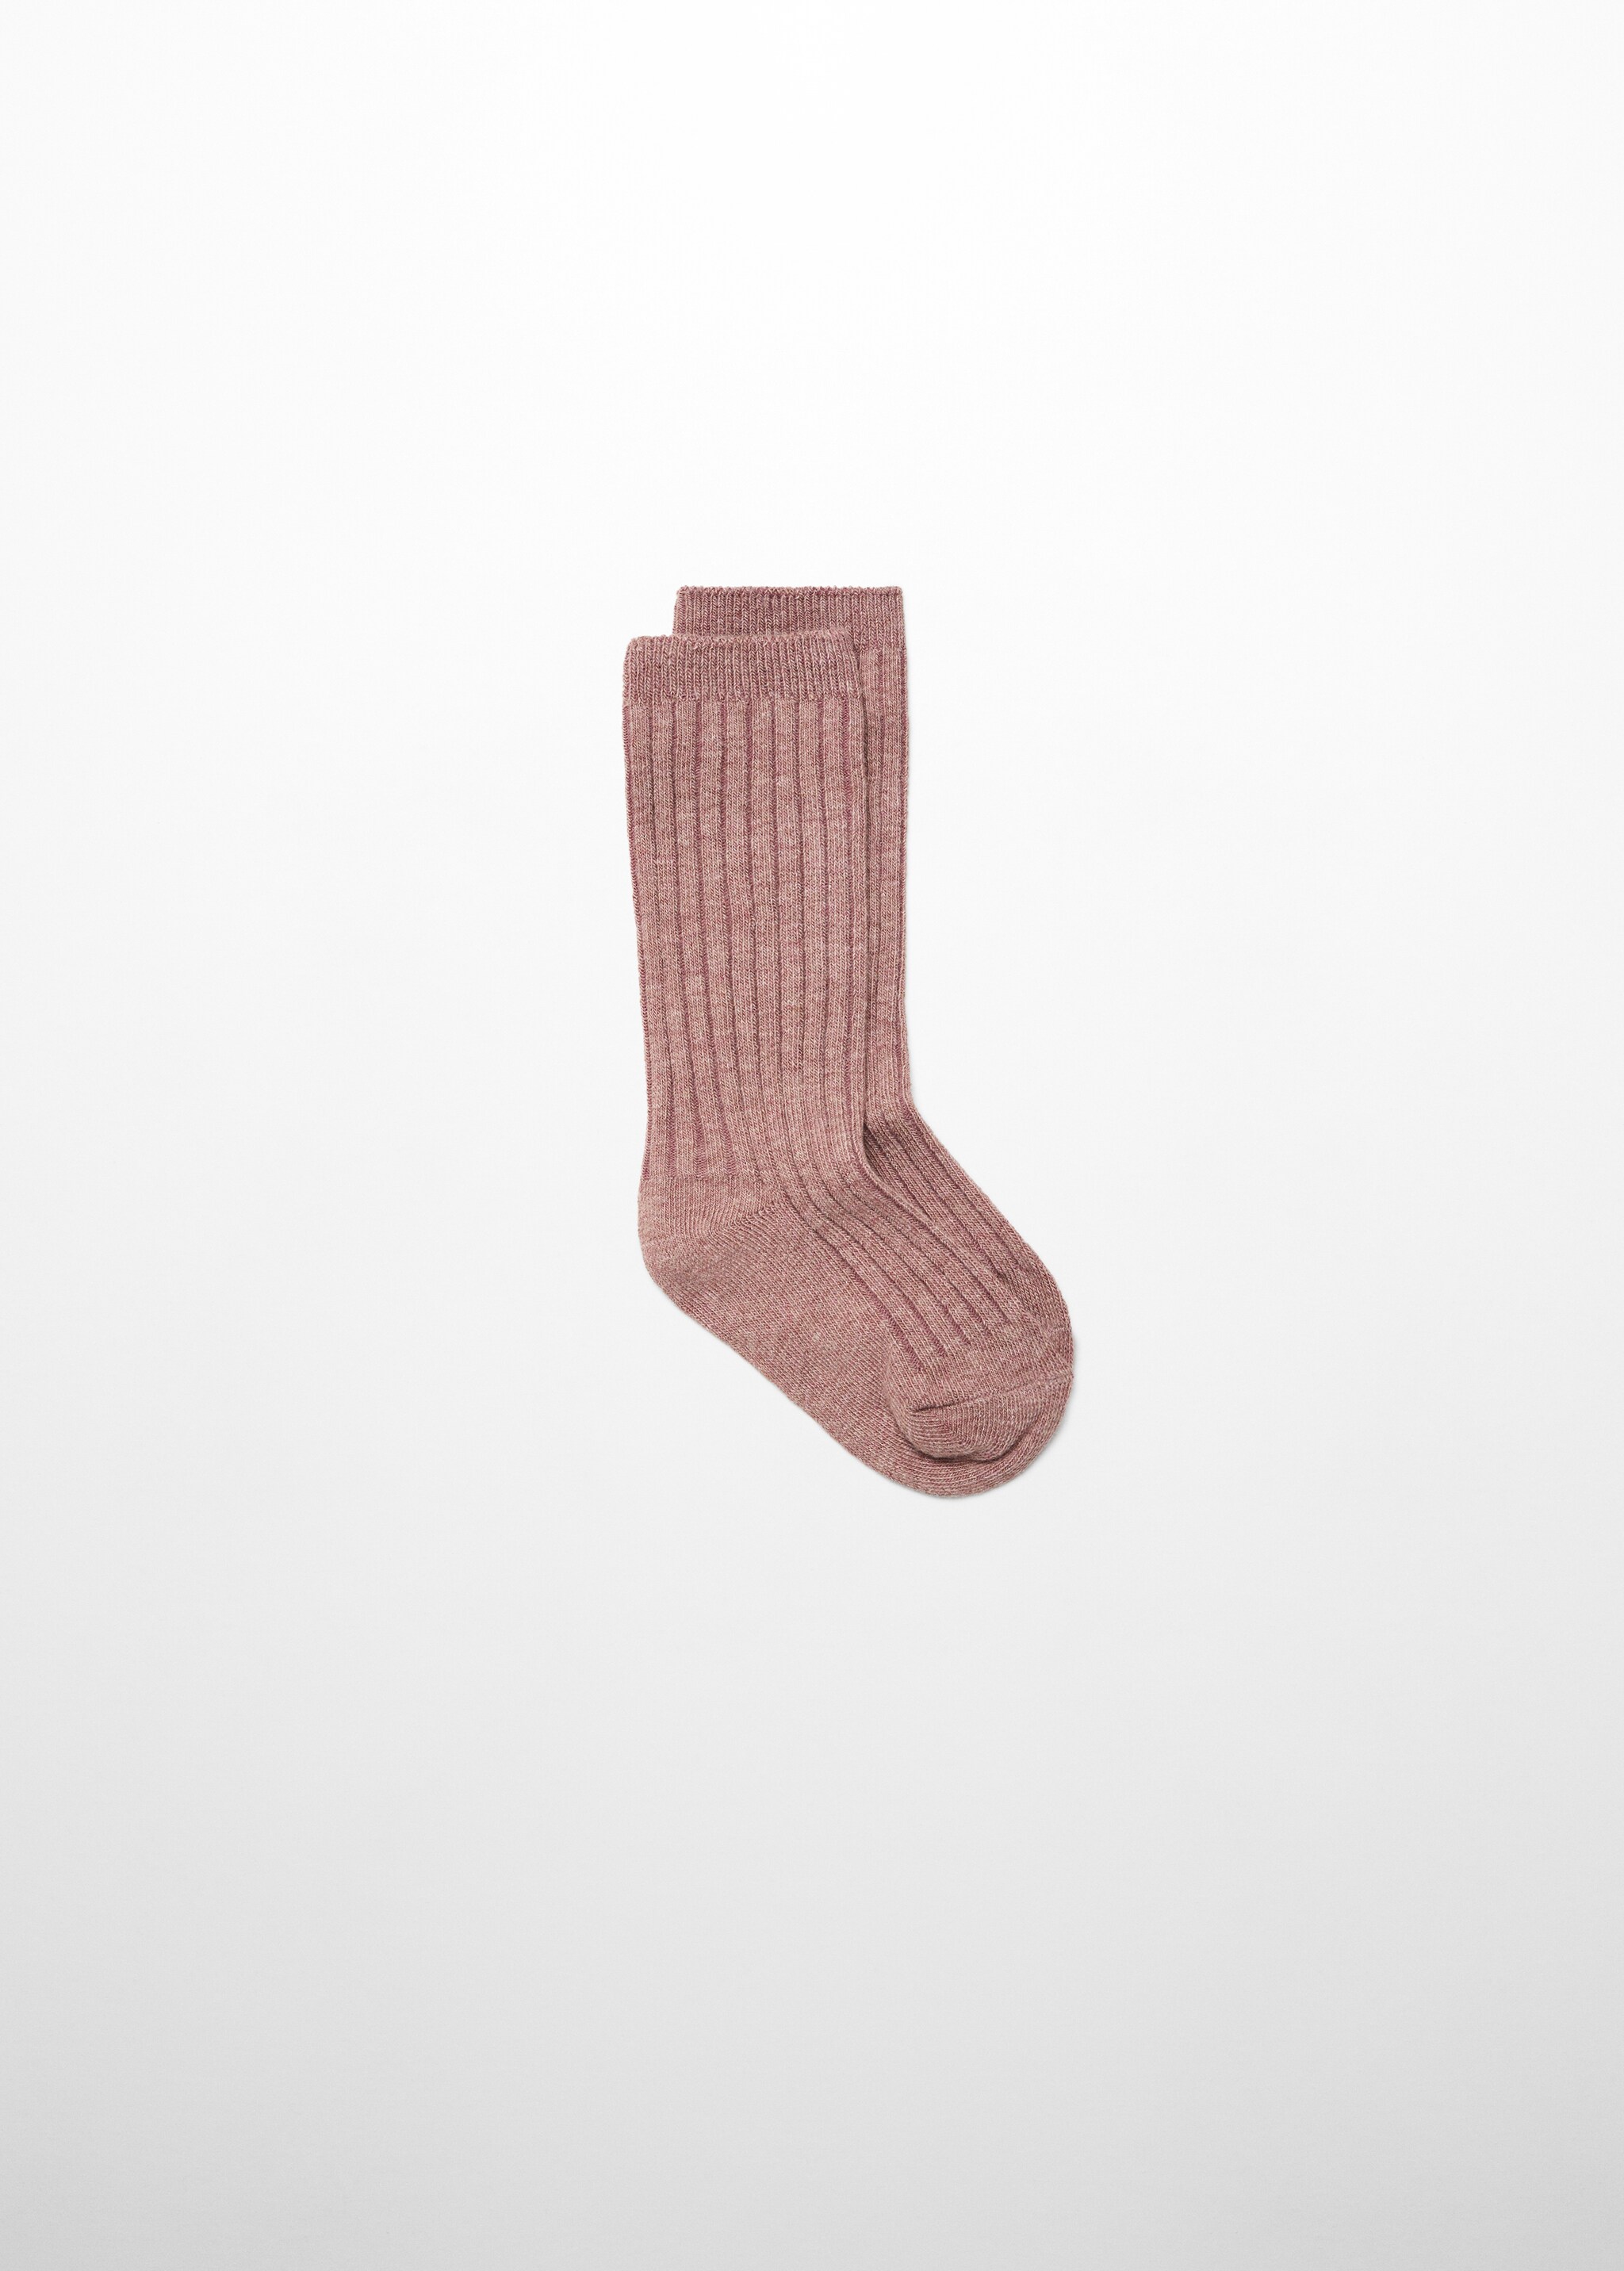 Long knitted socks - Article without model